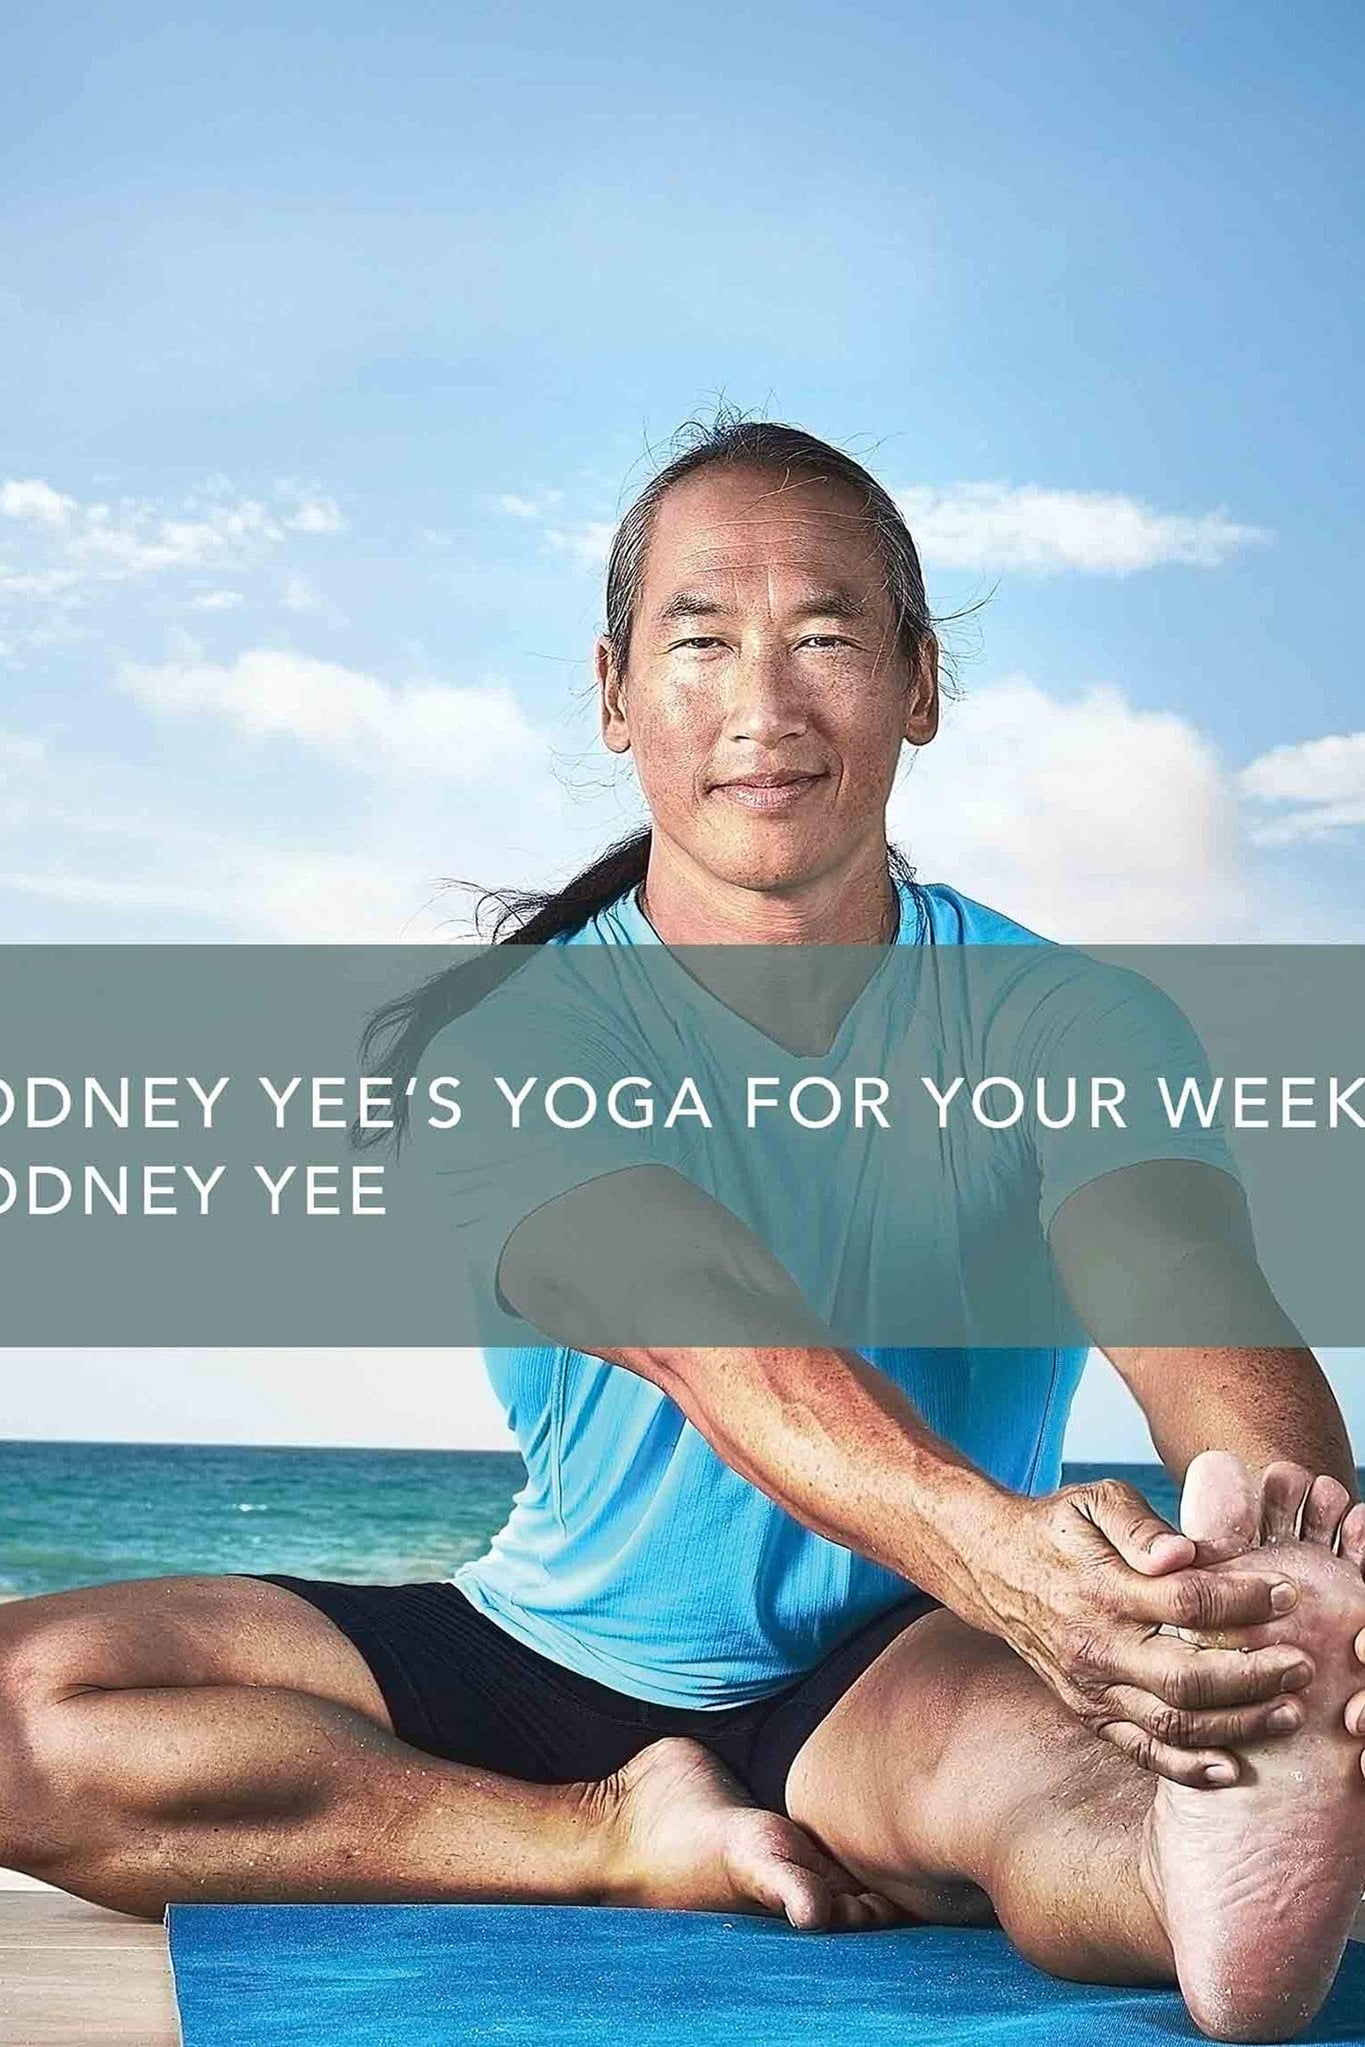 Rodney Yee's Yoga for Your Week: Strength